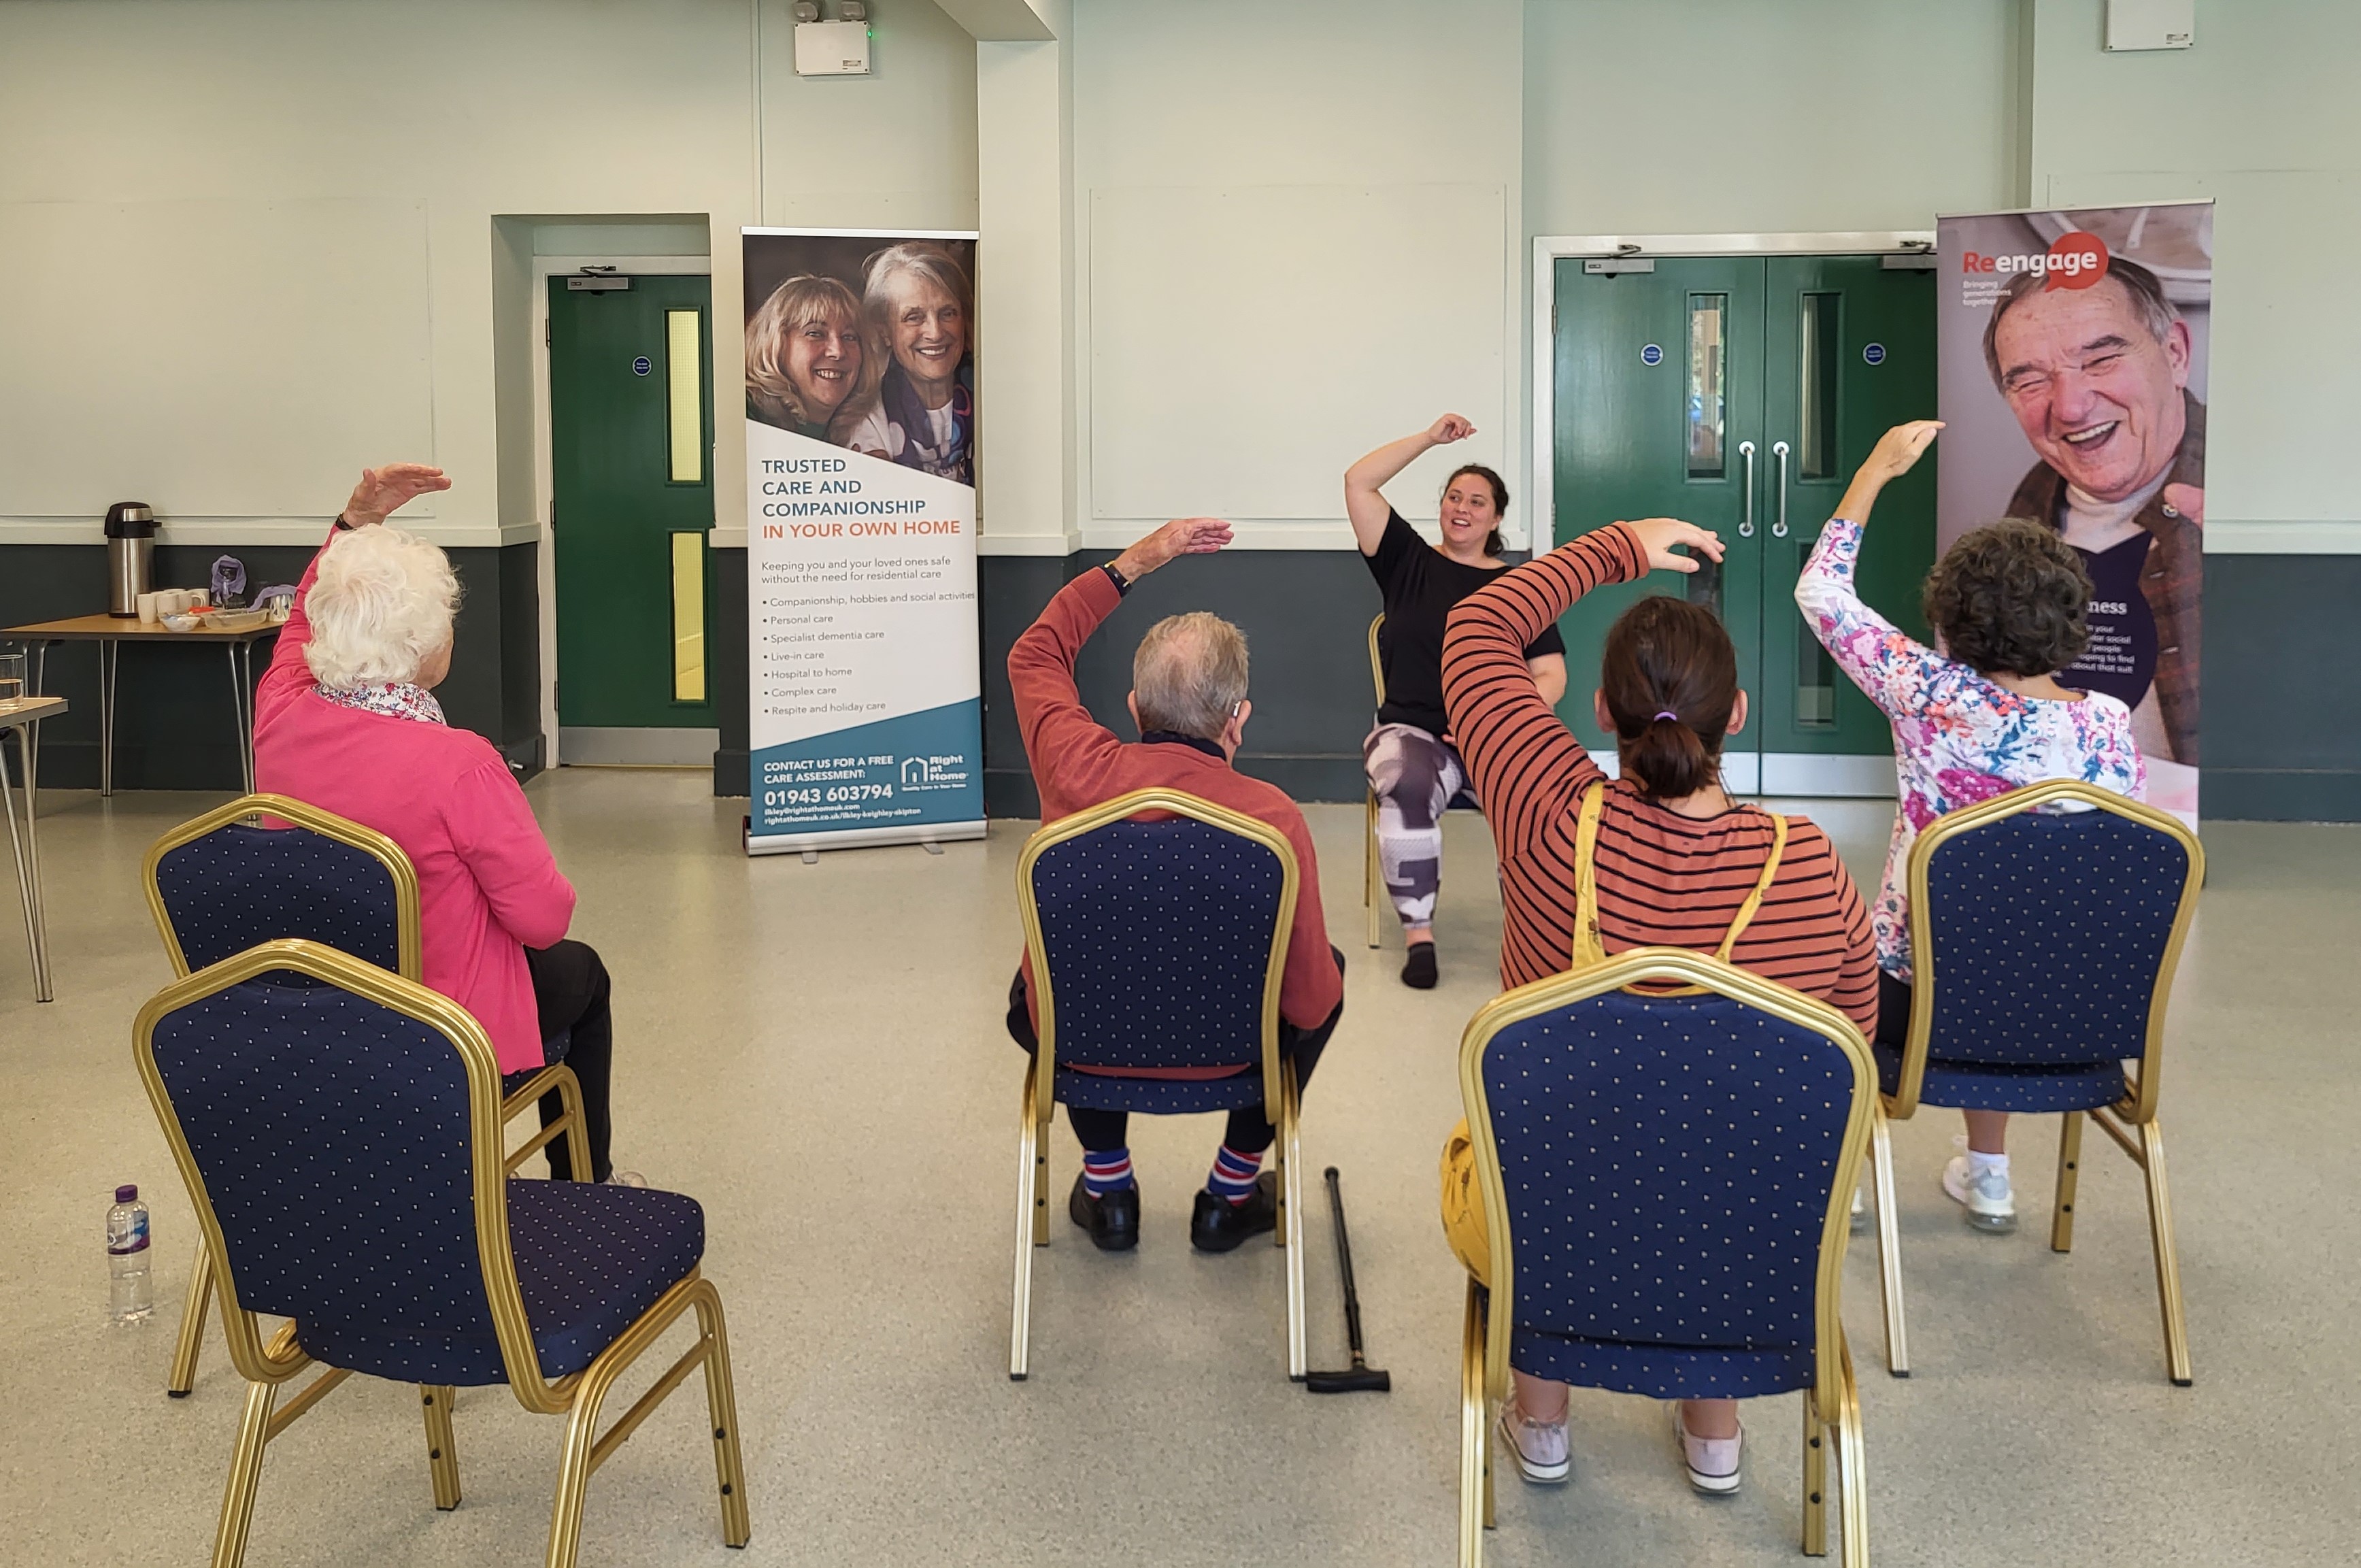 Chair Yoga For Seniors With Dementia and Alzheimer's - Giving Care